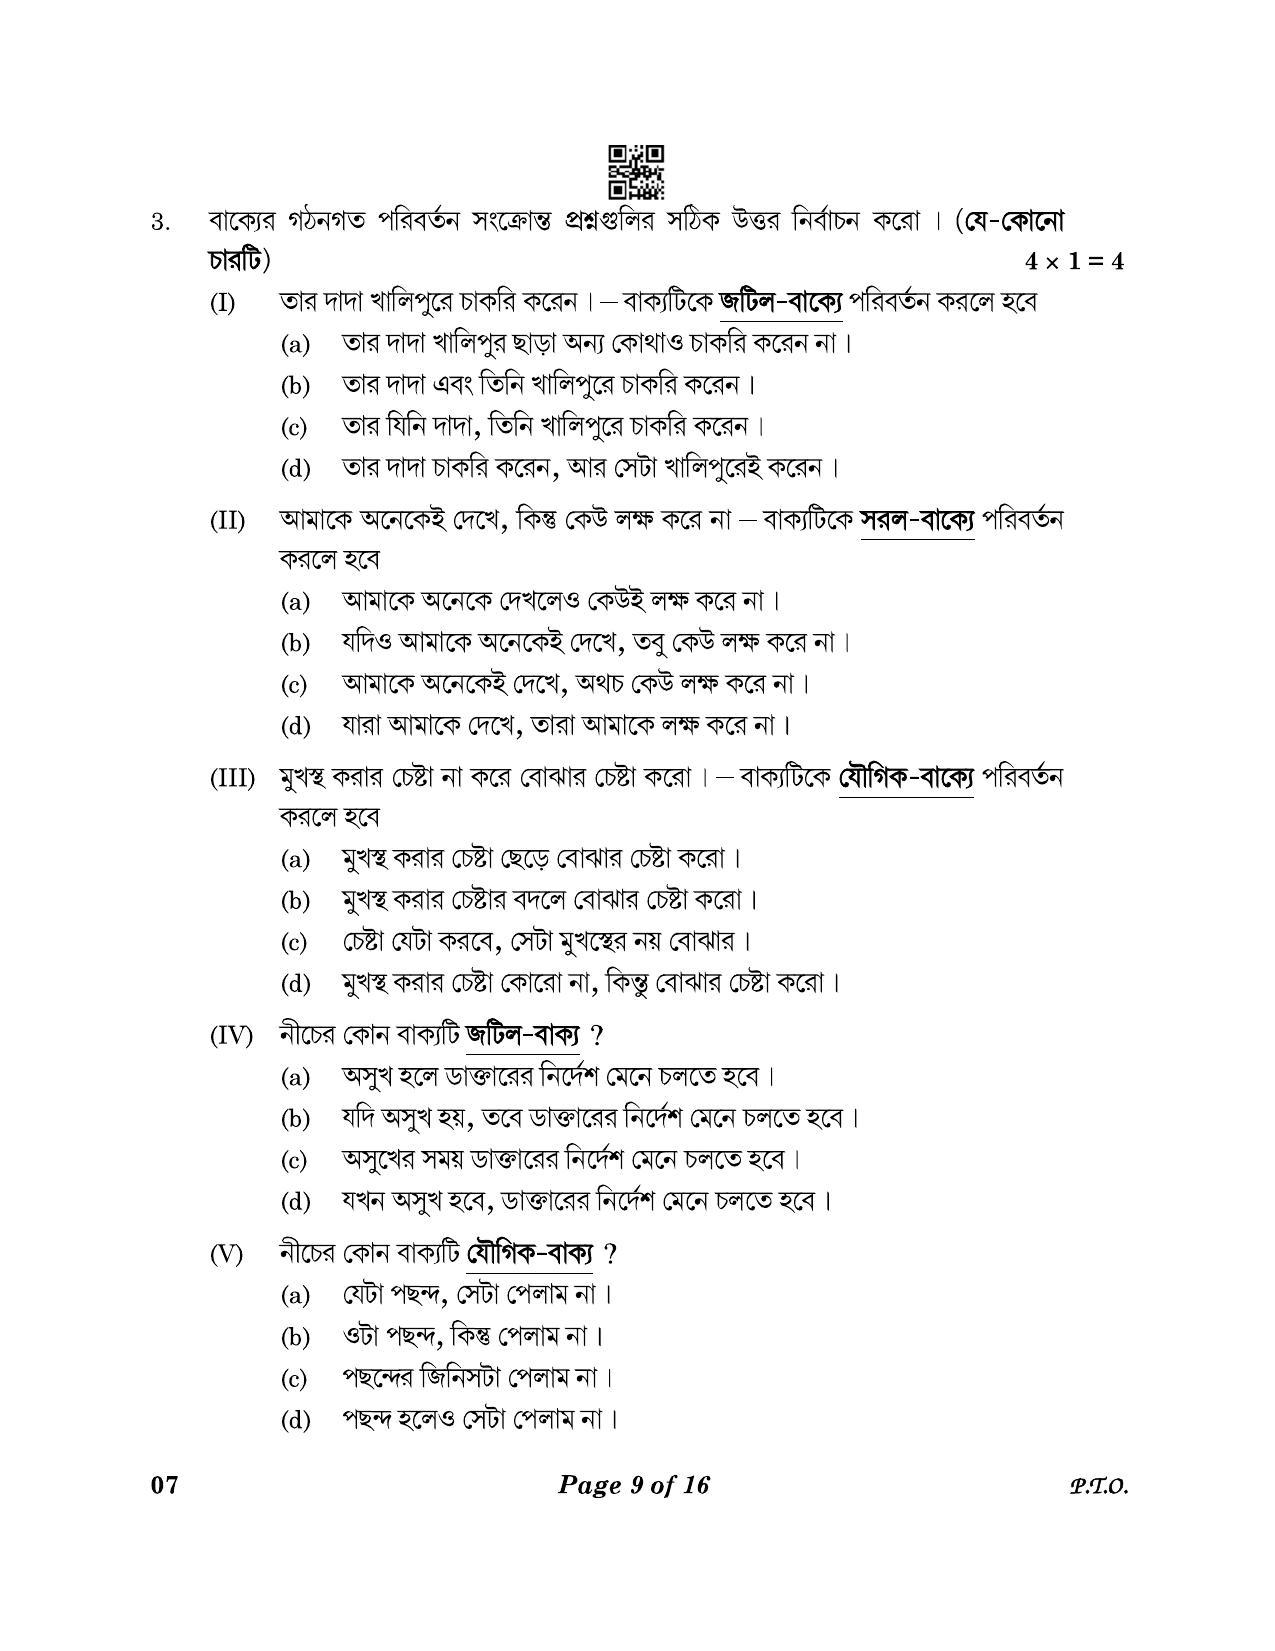 CBSE Class 10 07_Bengali 2023 Question Paper - Page 9